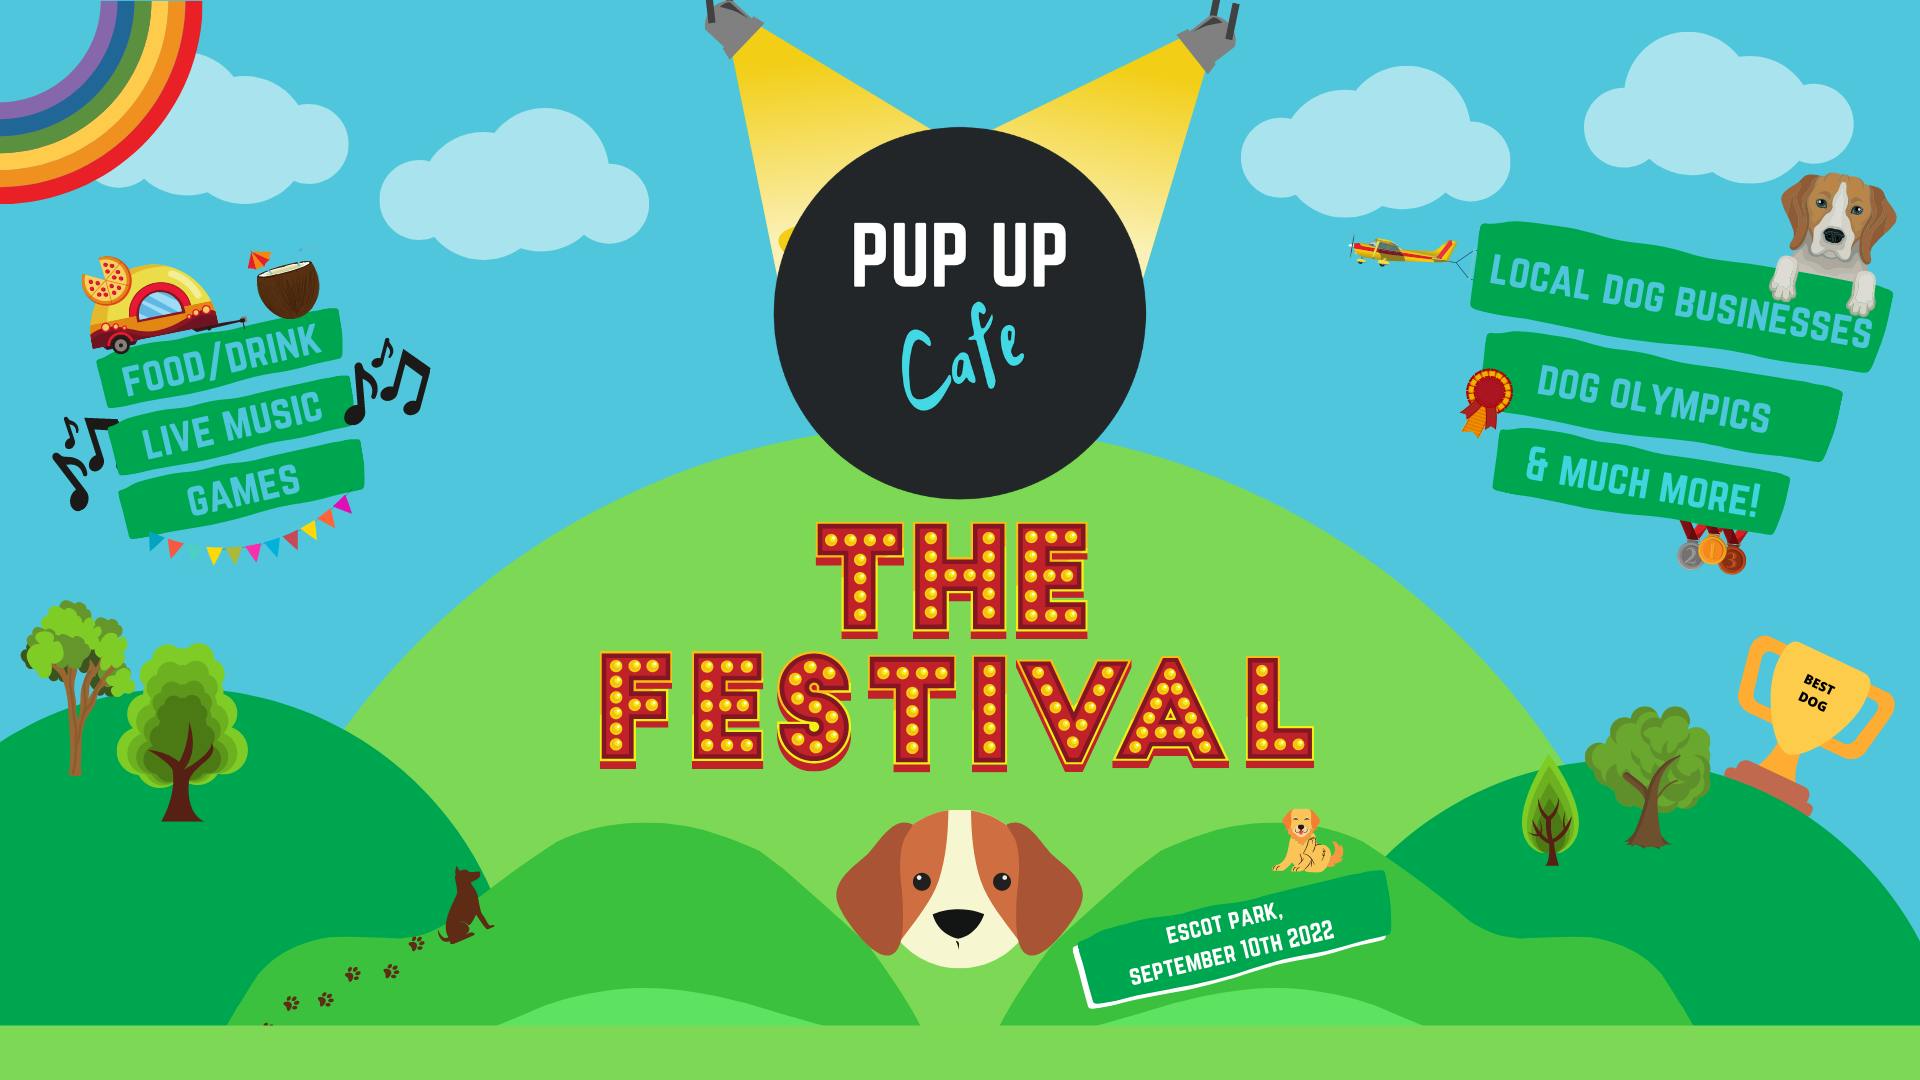 The Pup Up Cafe host their first ever dog festival in Devon!